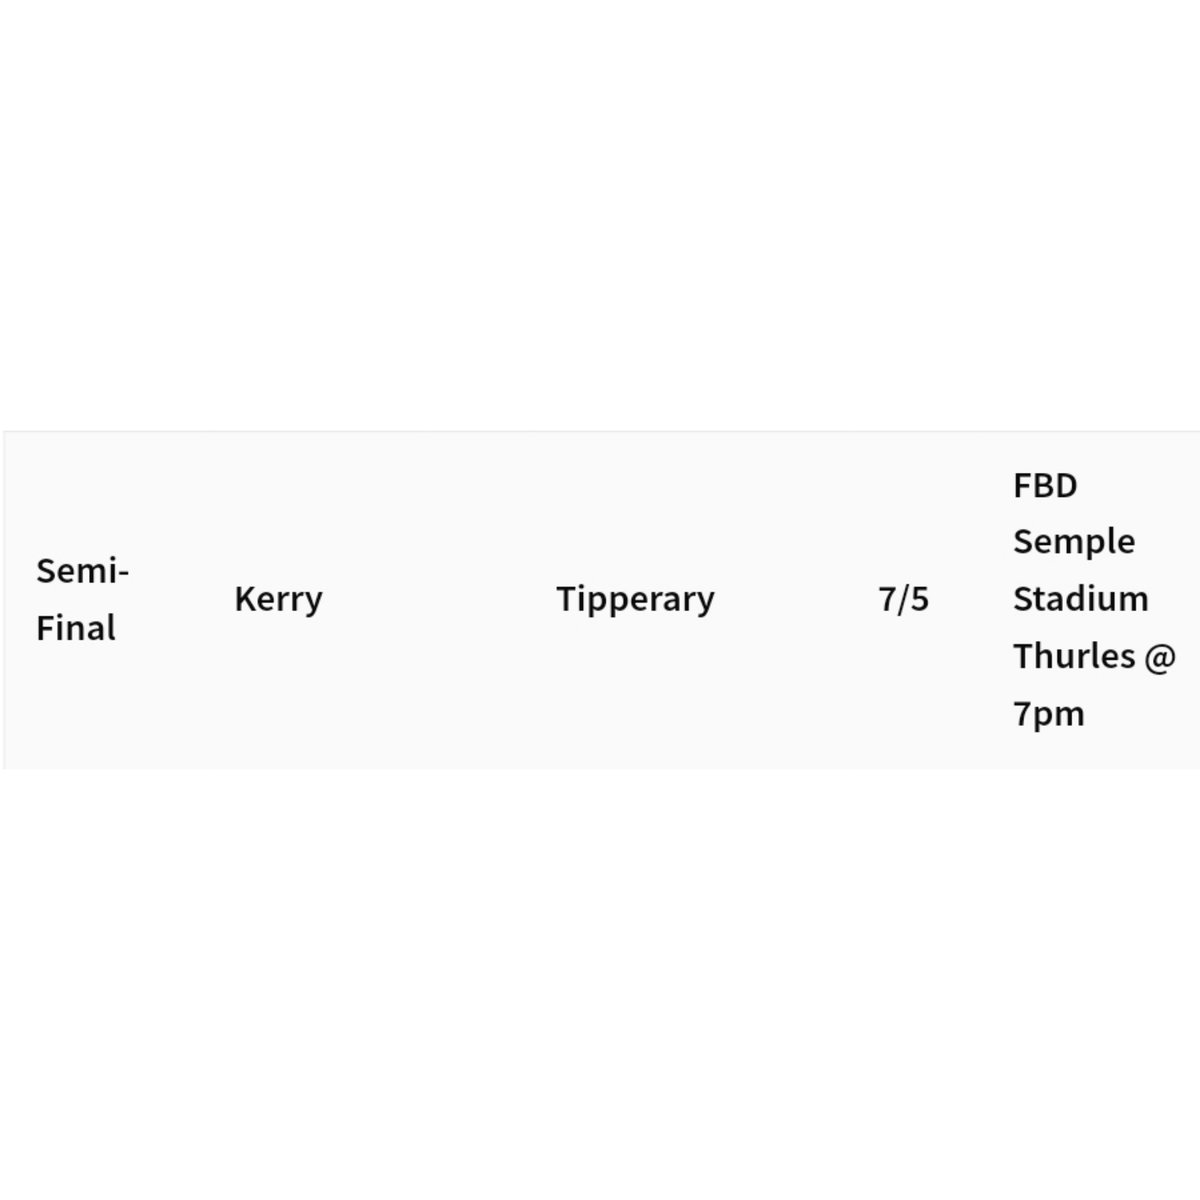 The very best of luck to Wayne Quillinan and his Kerry Minors when they play Tipperary in the EirGrid Munster Minor Semi-Final on Tuesday, 7th May, at 7pm in FBD Semple Stadium, Thurles. Especially our own Ned Ryan & Selector Séamus Ó Dubhda. Beir bua agus beannacht!